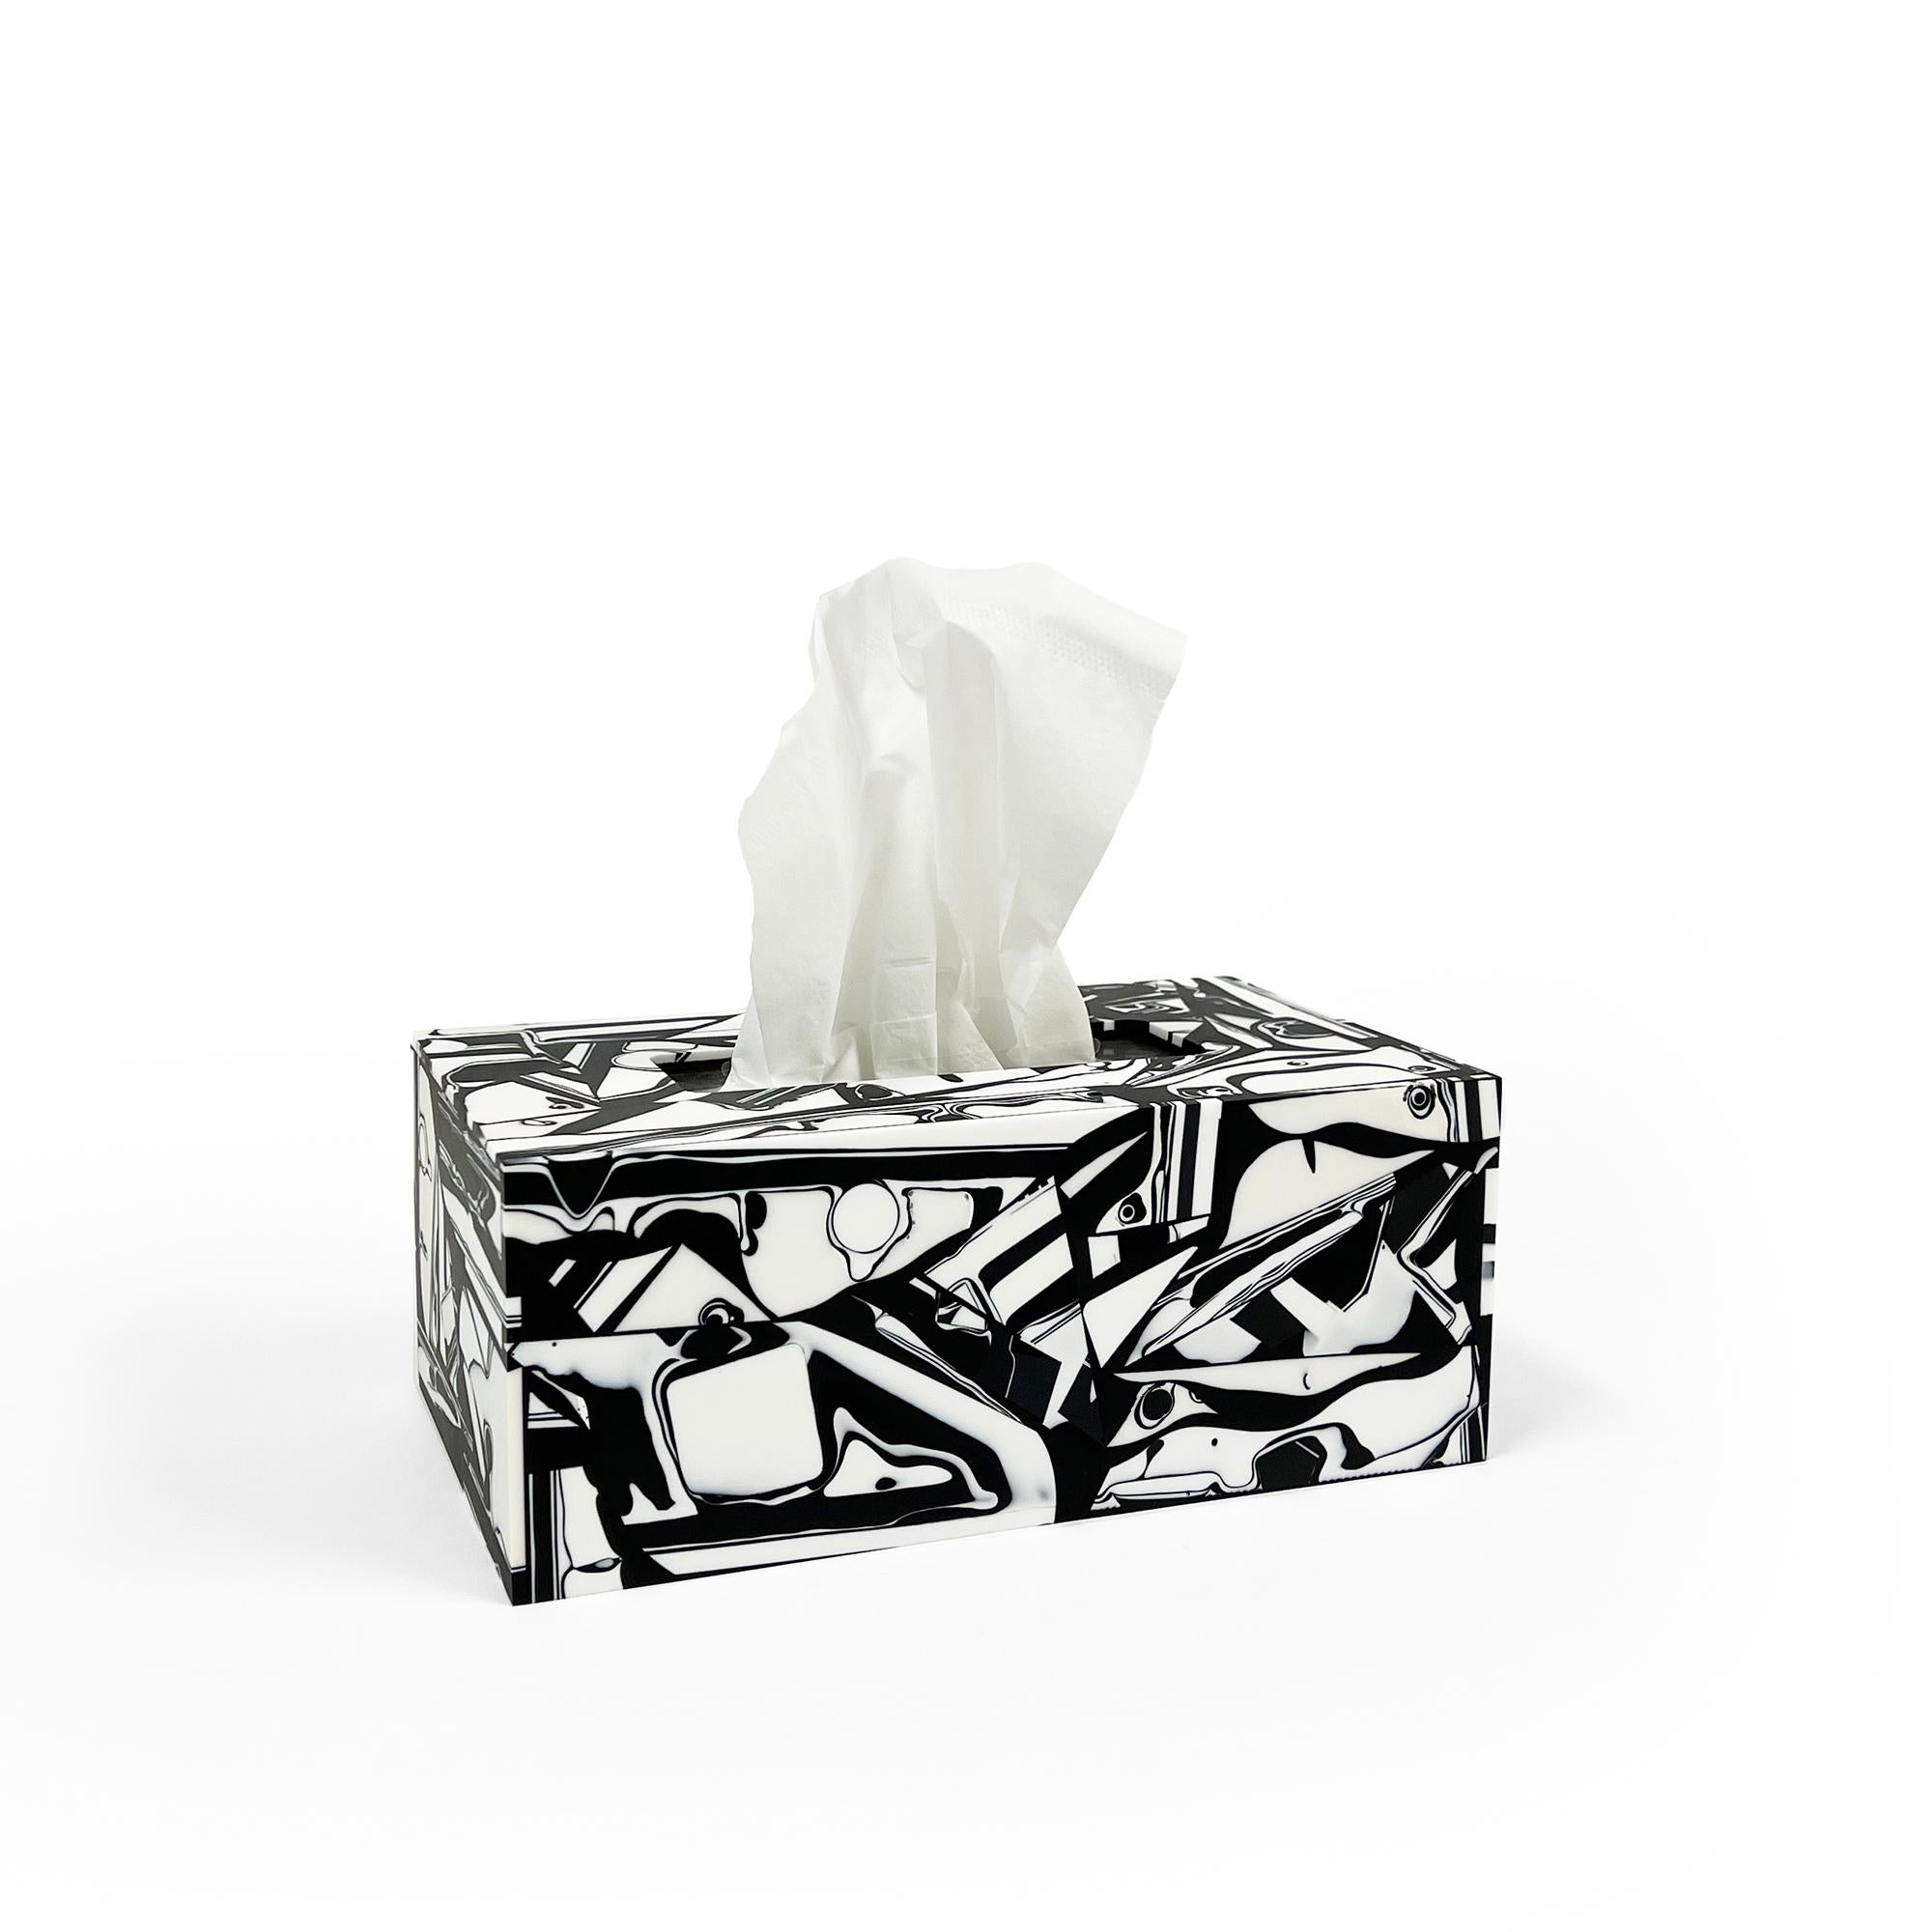 Cast Unique Contemporary Resin Black and White Tissue Box Cover by Elyse Graham